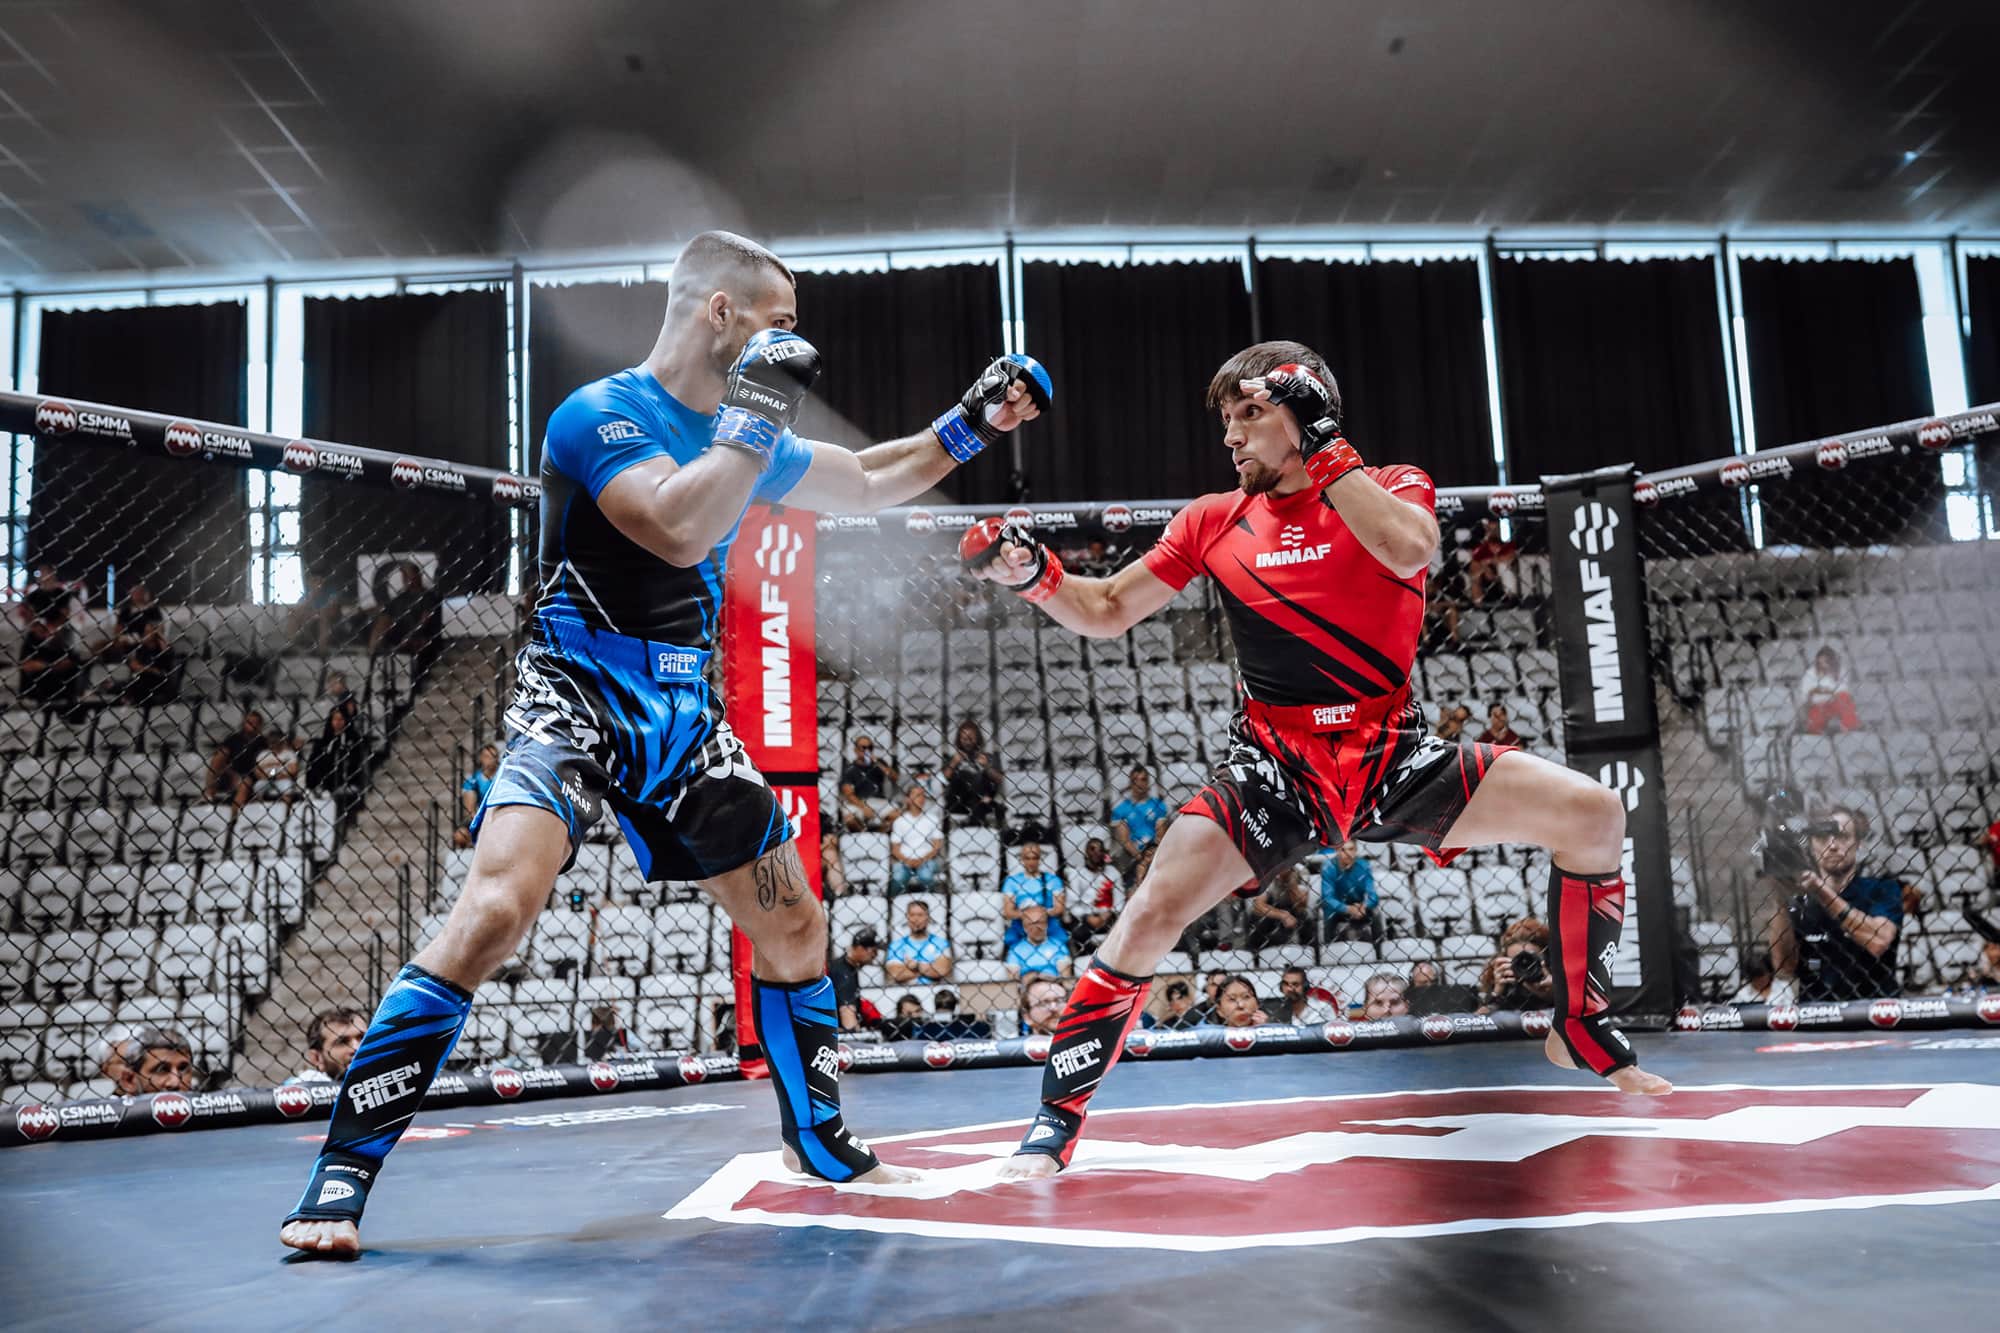 IMMAF World Cup by the numbers